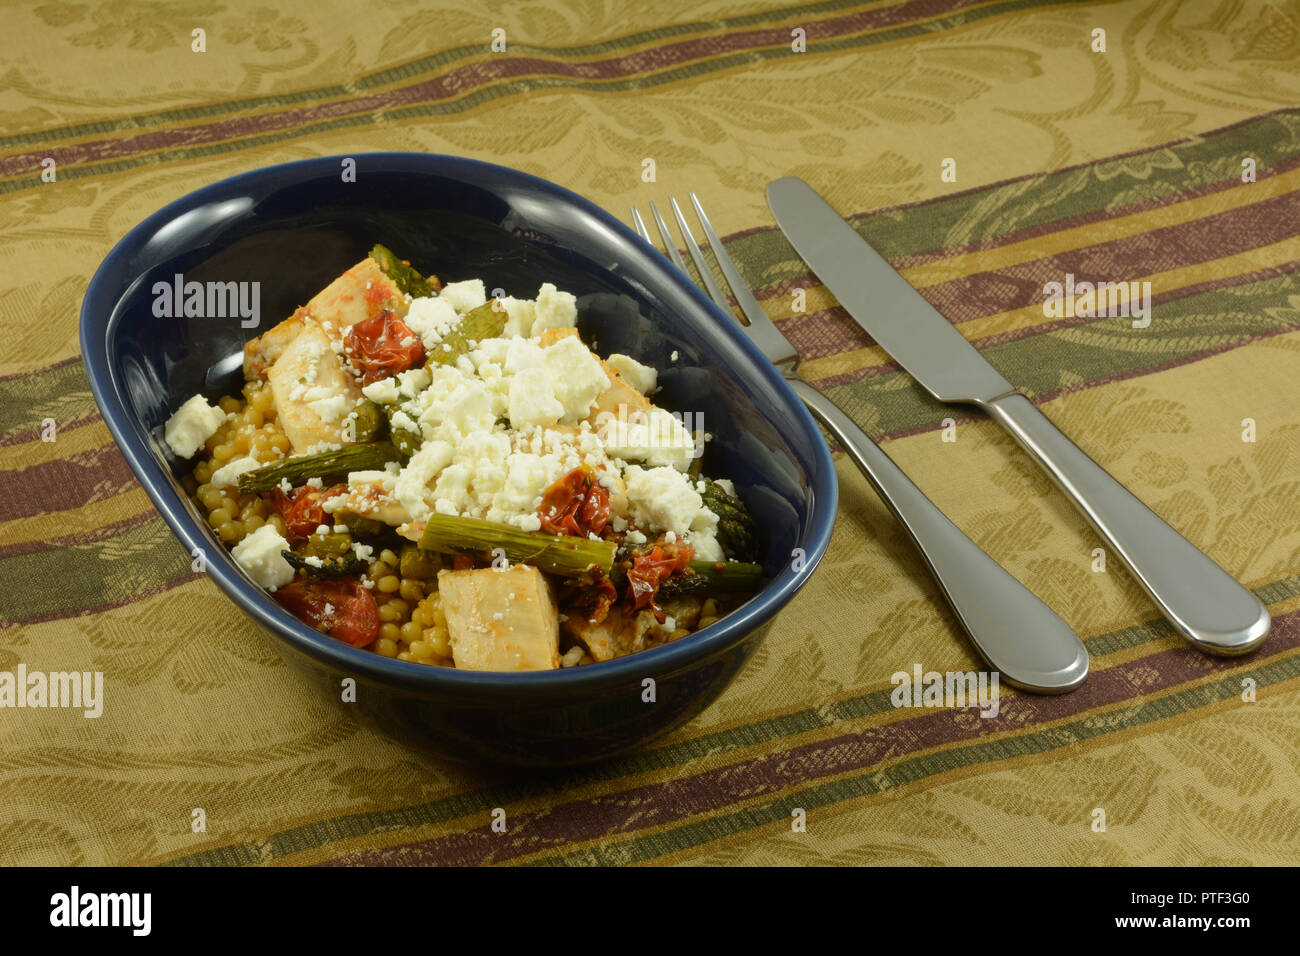 Israeli couscous or ptitim covered with chicken, roasted vegetables of asparagus and tomatoes with feta cheese on top in oval blue dish Stock Photo